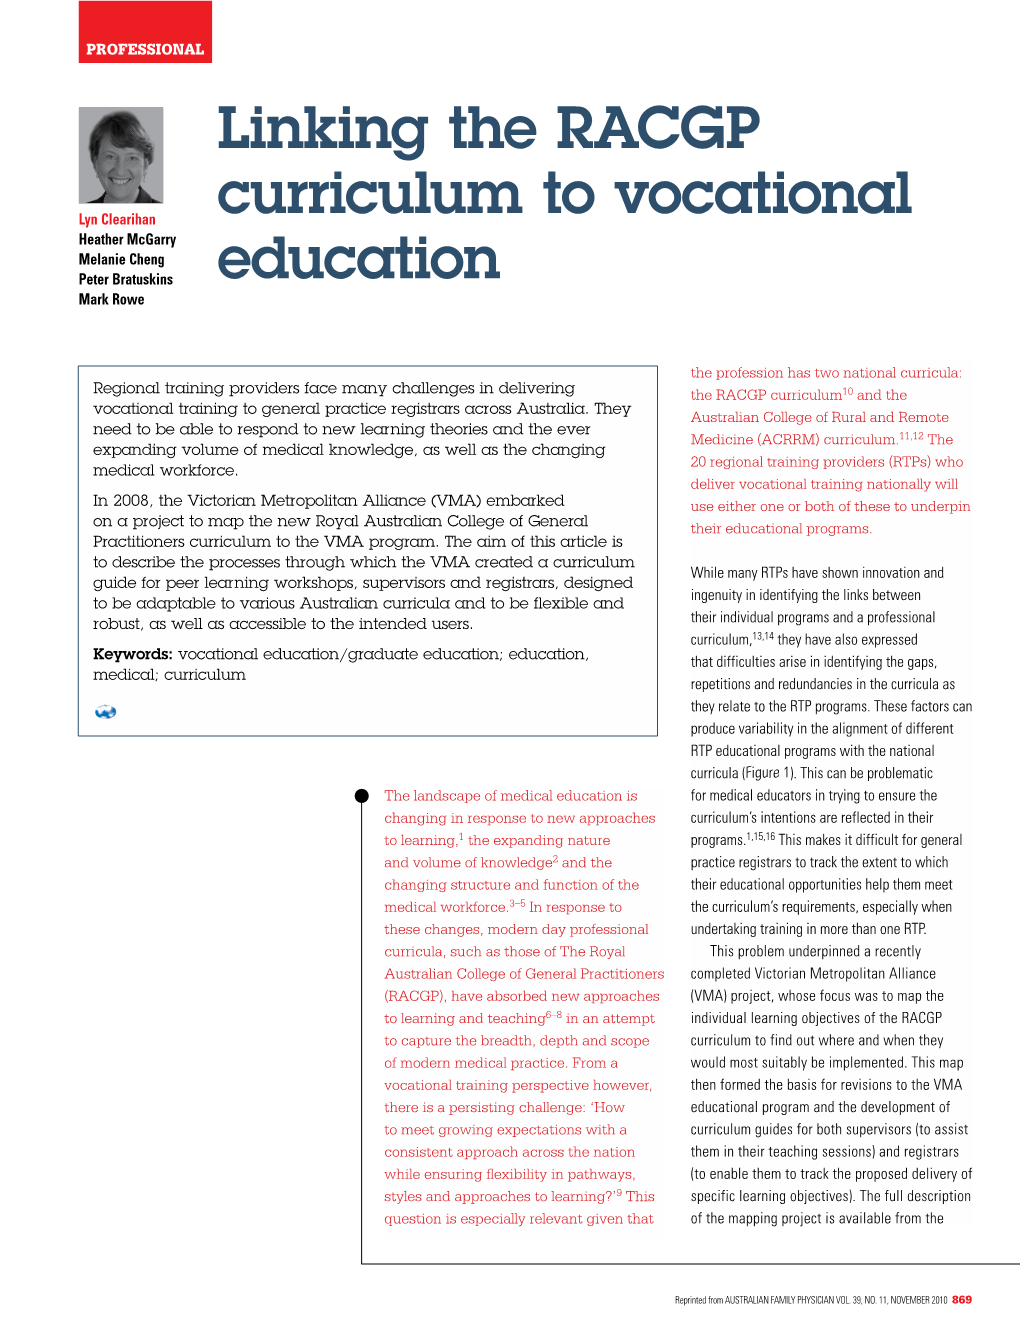 Linking the RACGP Curriculum to Vocational Education